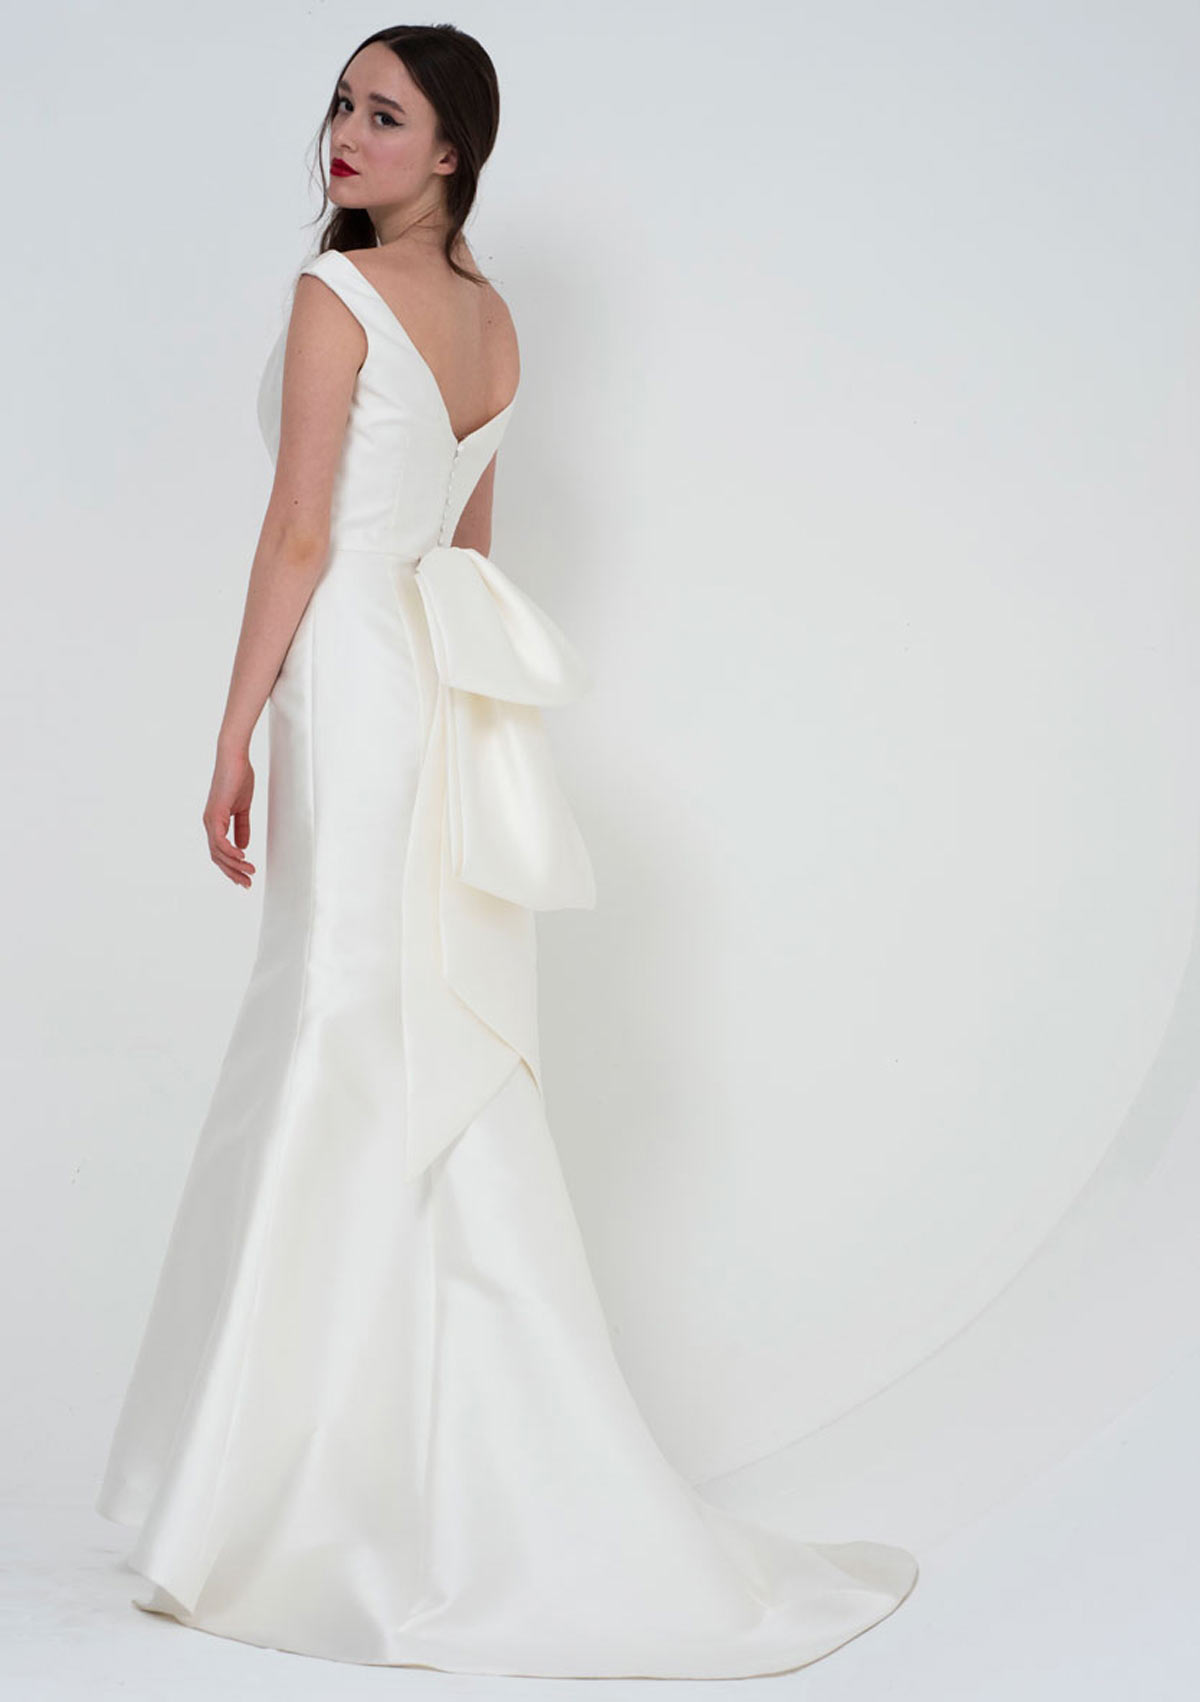 THE BEST OF: Modern Fashion Bridal Gowns - Part 2 - Together Journal -  Fashion